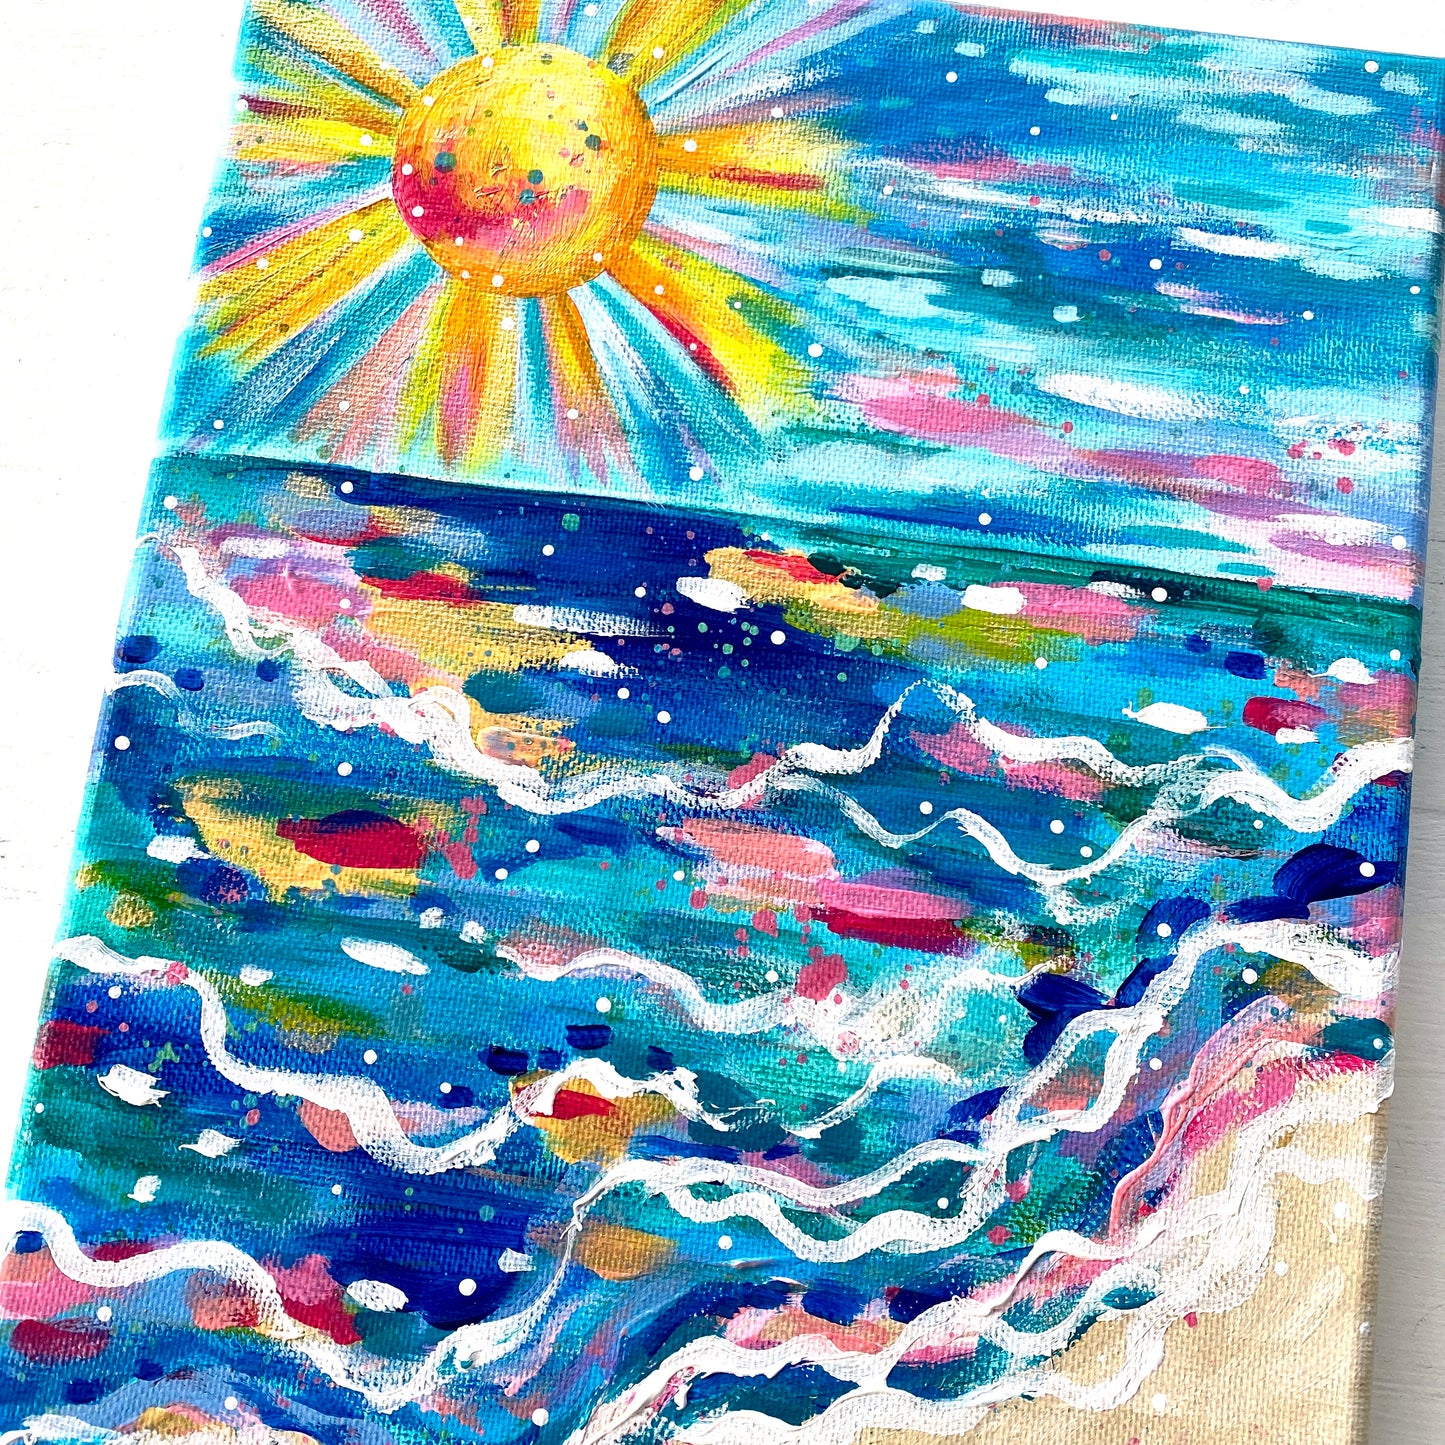 “Beach Days and Sun Rays” 8x10 inch original painting on canvas